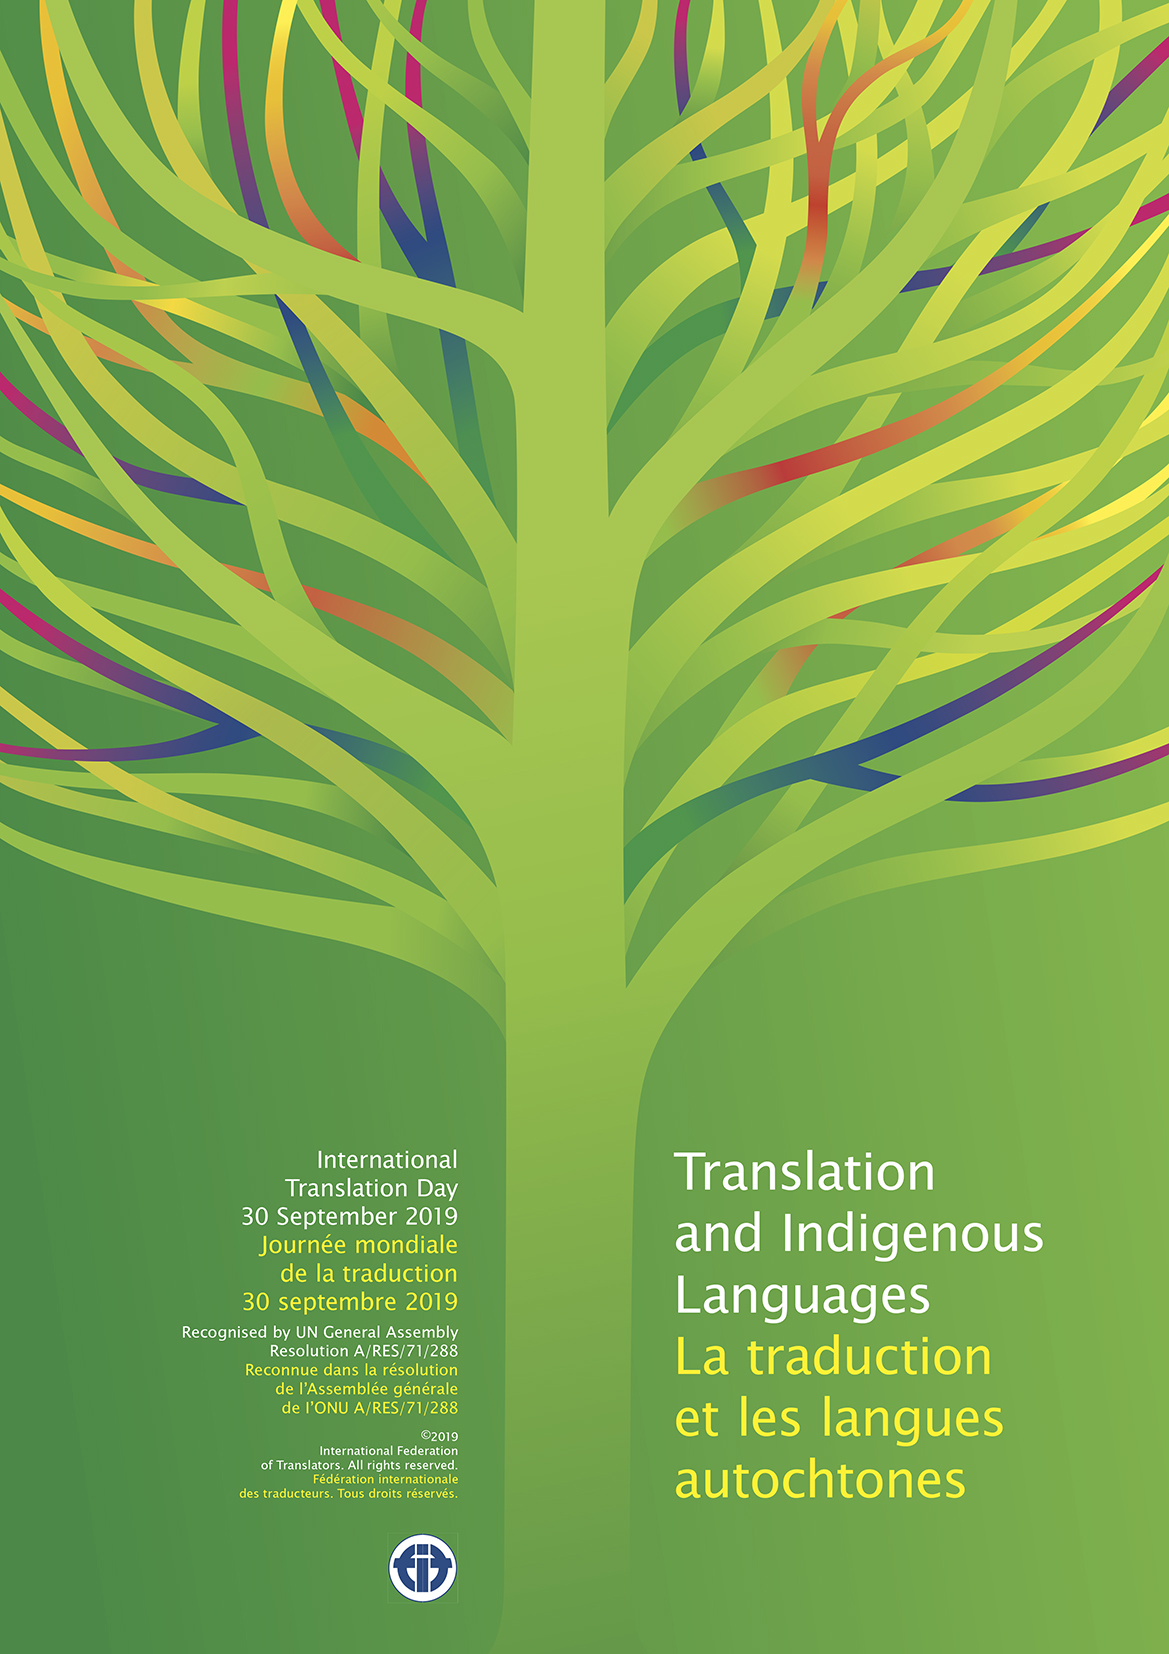 FIT’s International Translation Day 2019 winning Poster, by Graphic Designer Claudia Wolf